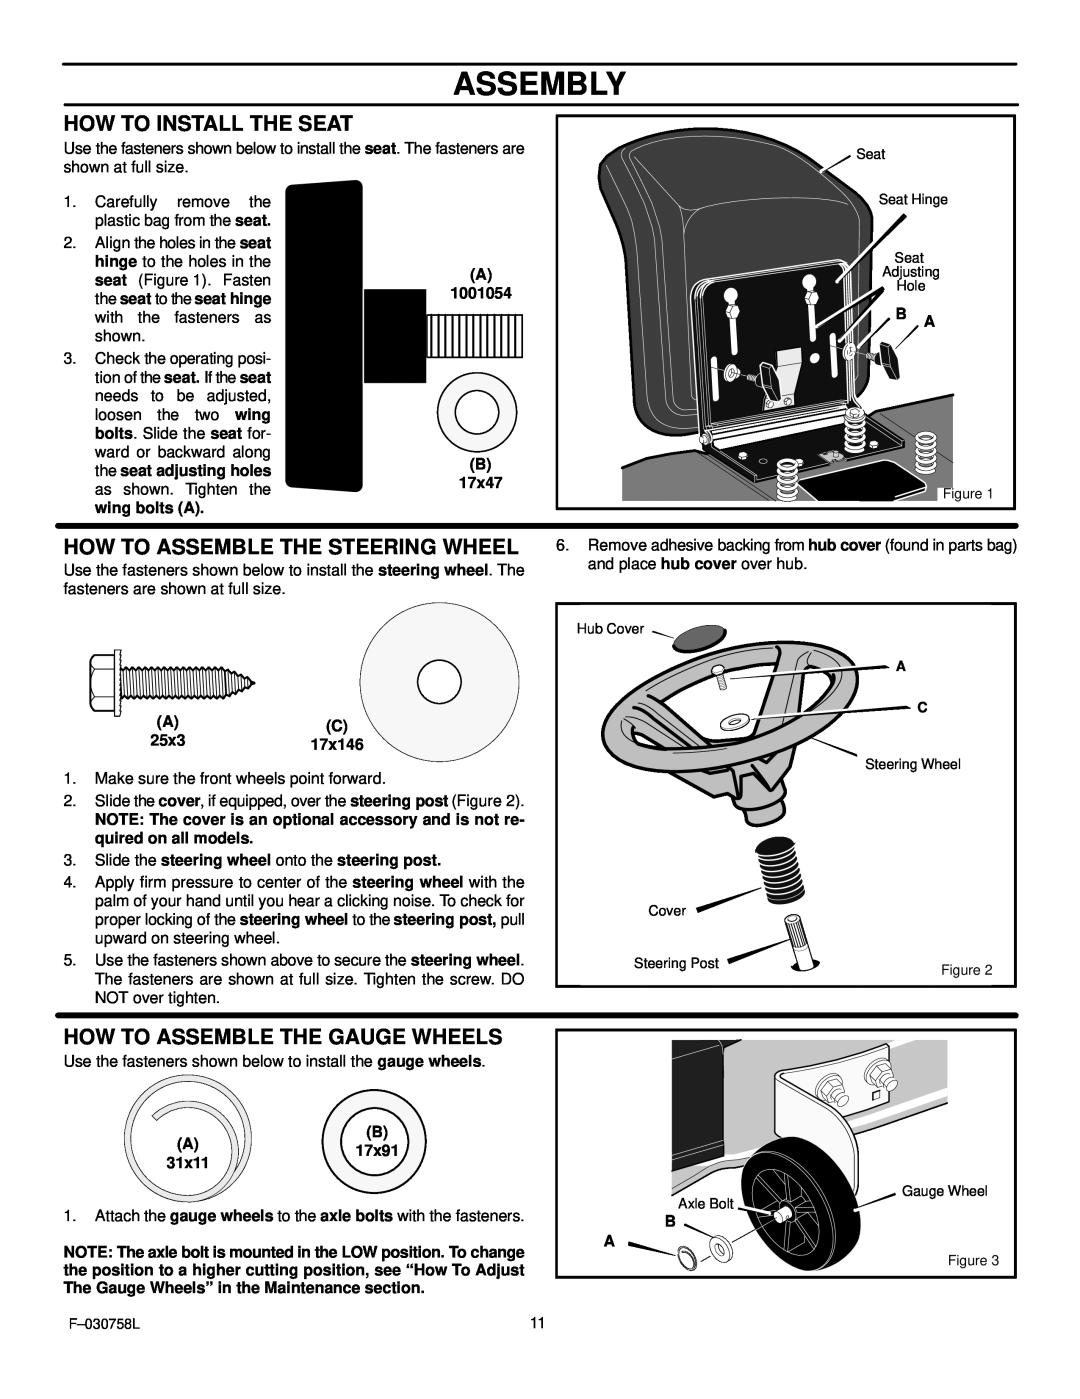 Murray 465609x24A Assembly, How To Install The Seat, How To Assemble The Steering Wheel, How To Assemble The Gauge Wheels 